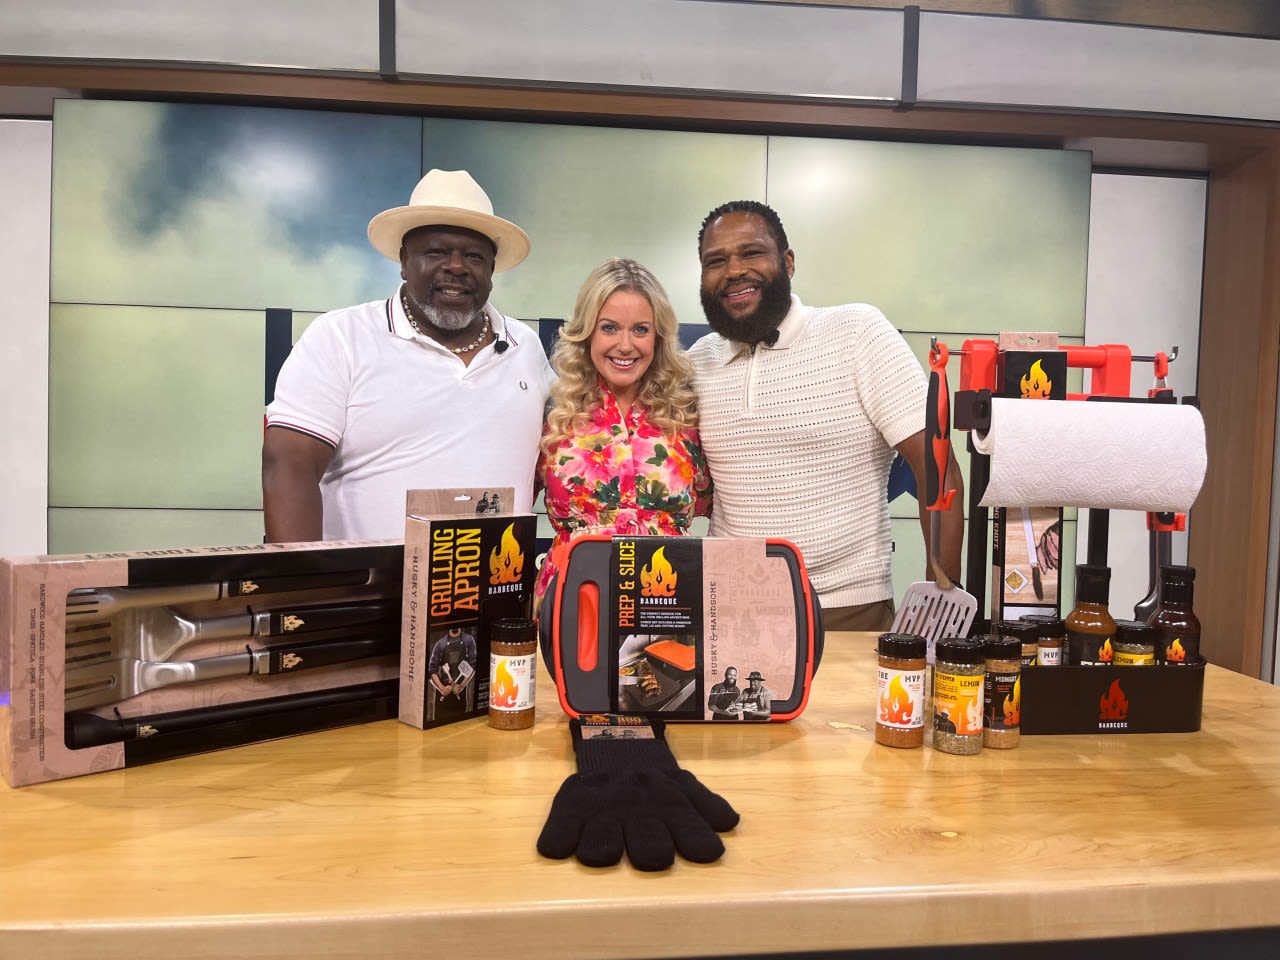 Comedy duo Anthony Anderson and Cedric the Entertainer wrap up their AC Barbeque food tour in Houston